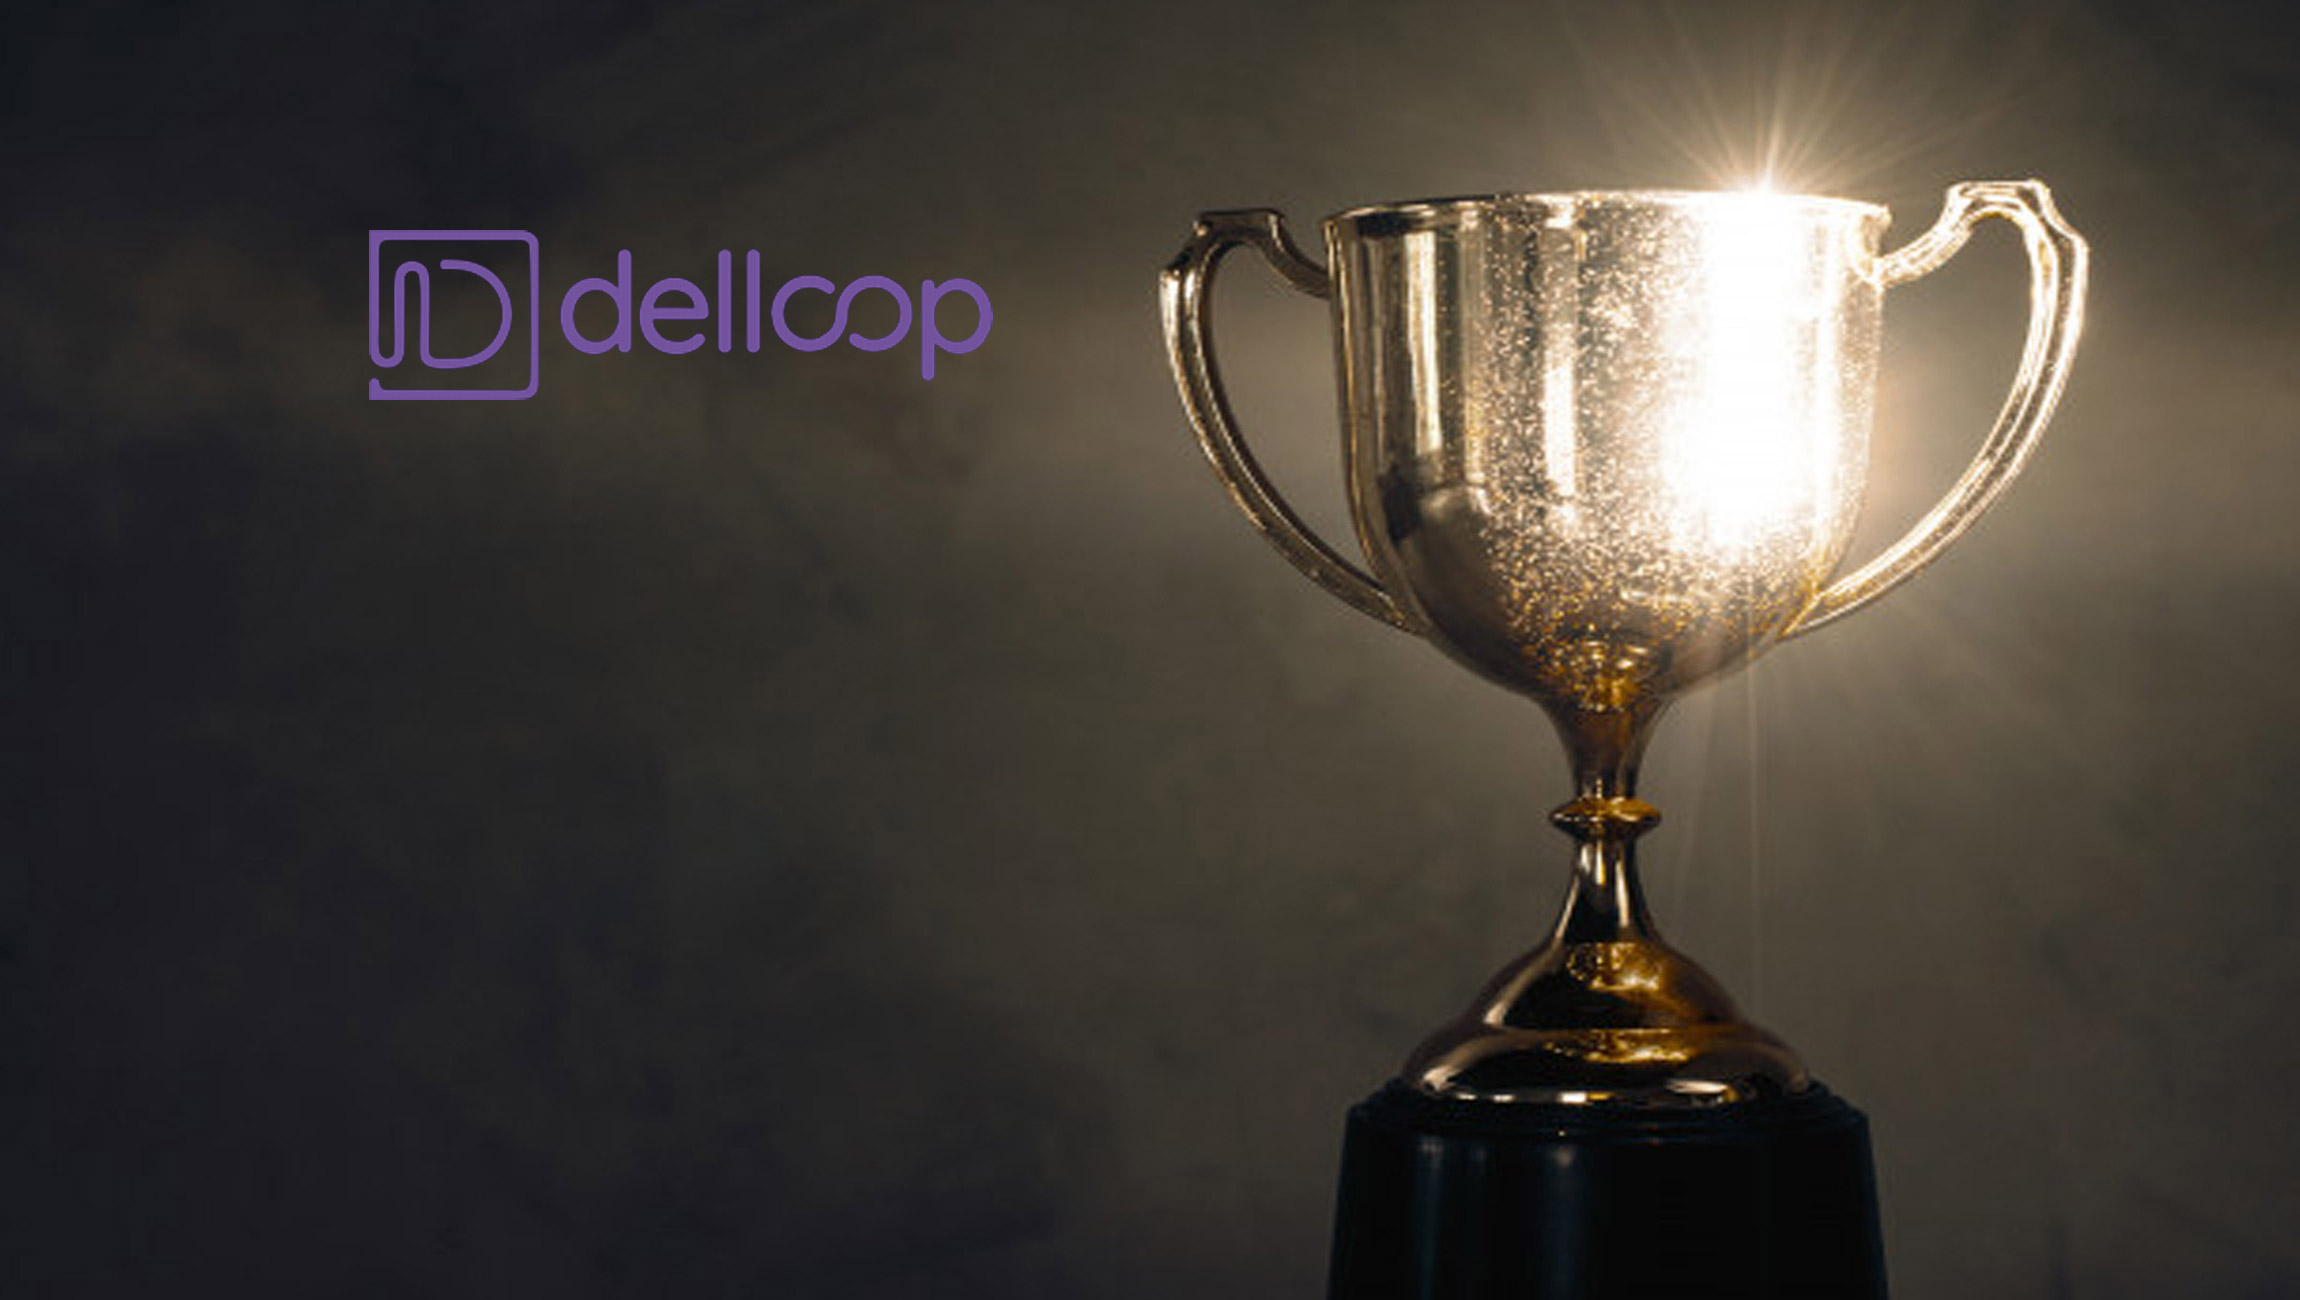 Retail Technology Innovator Awarded Delloop In Europe